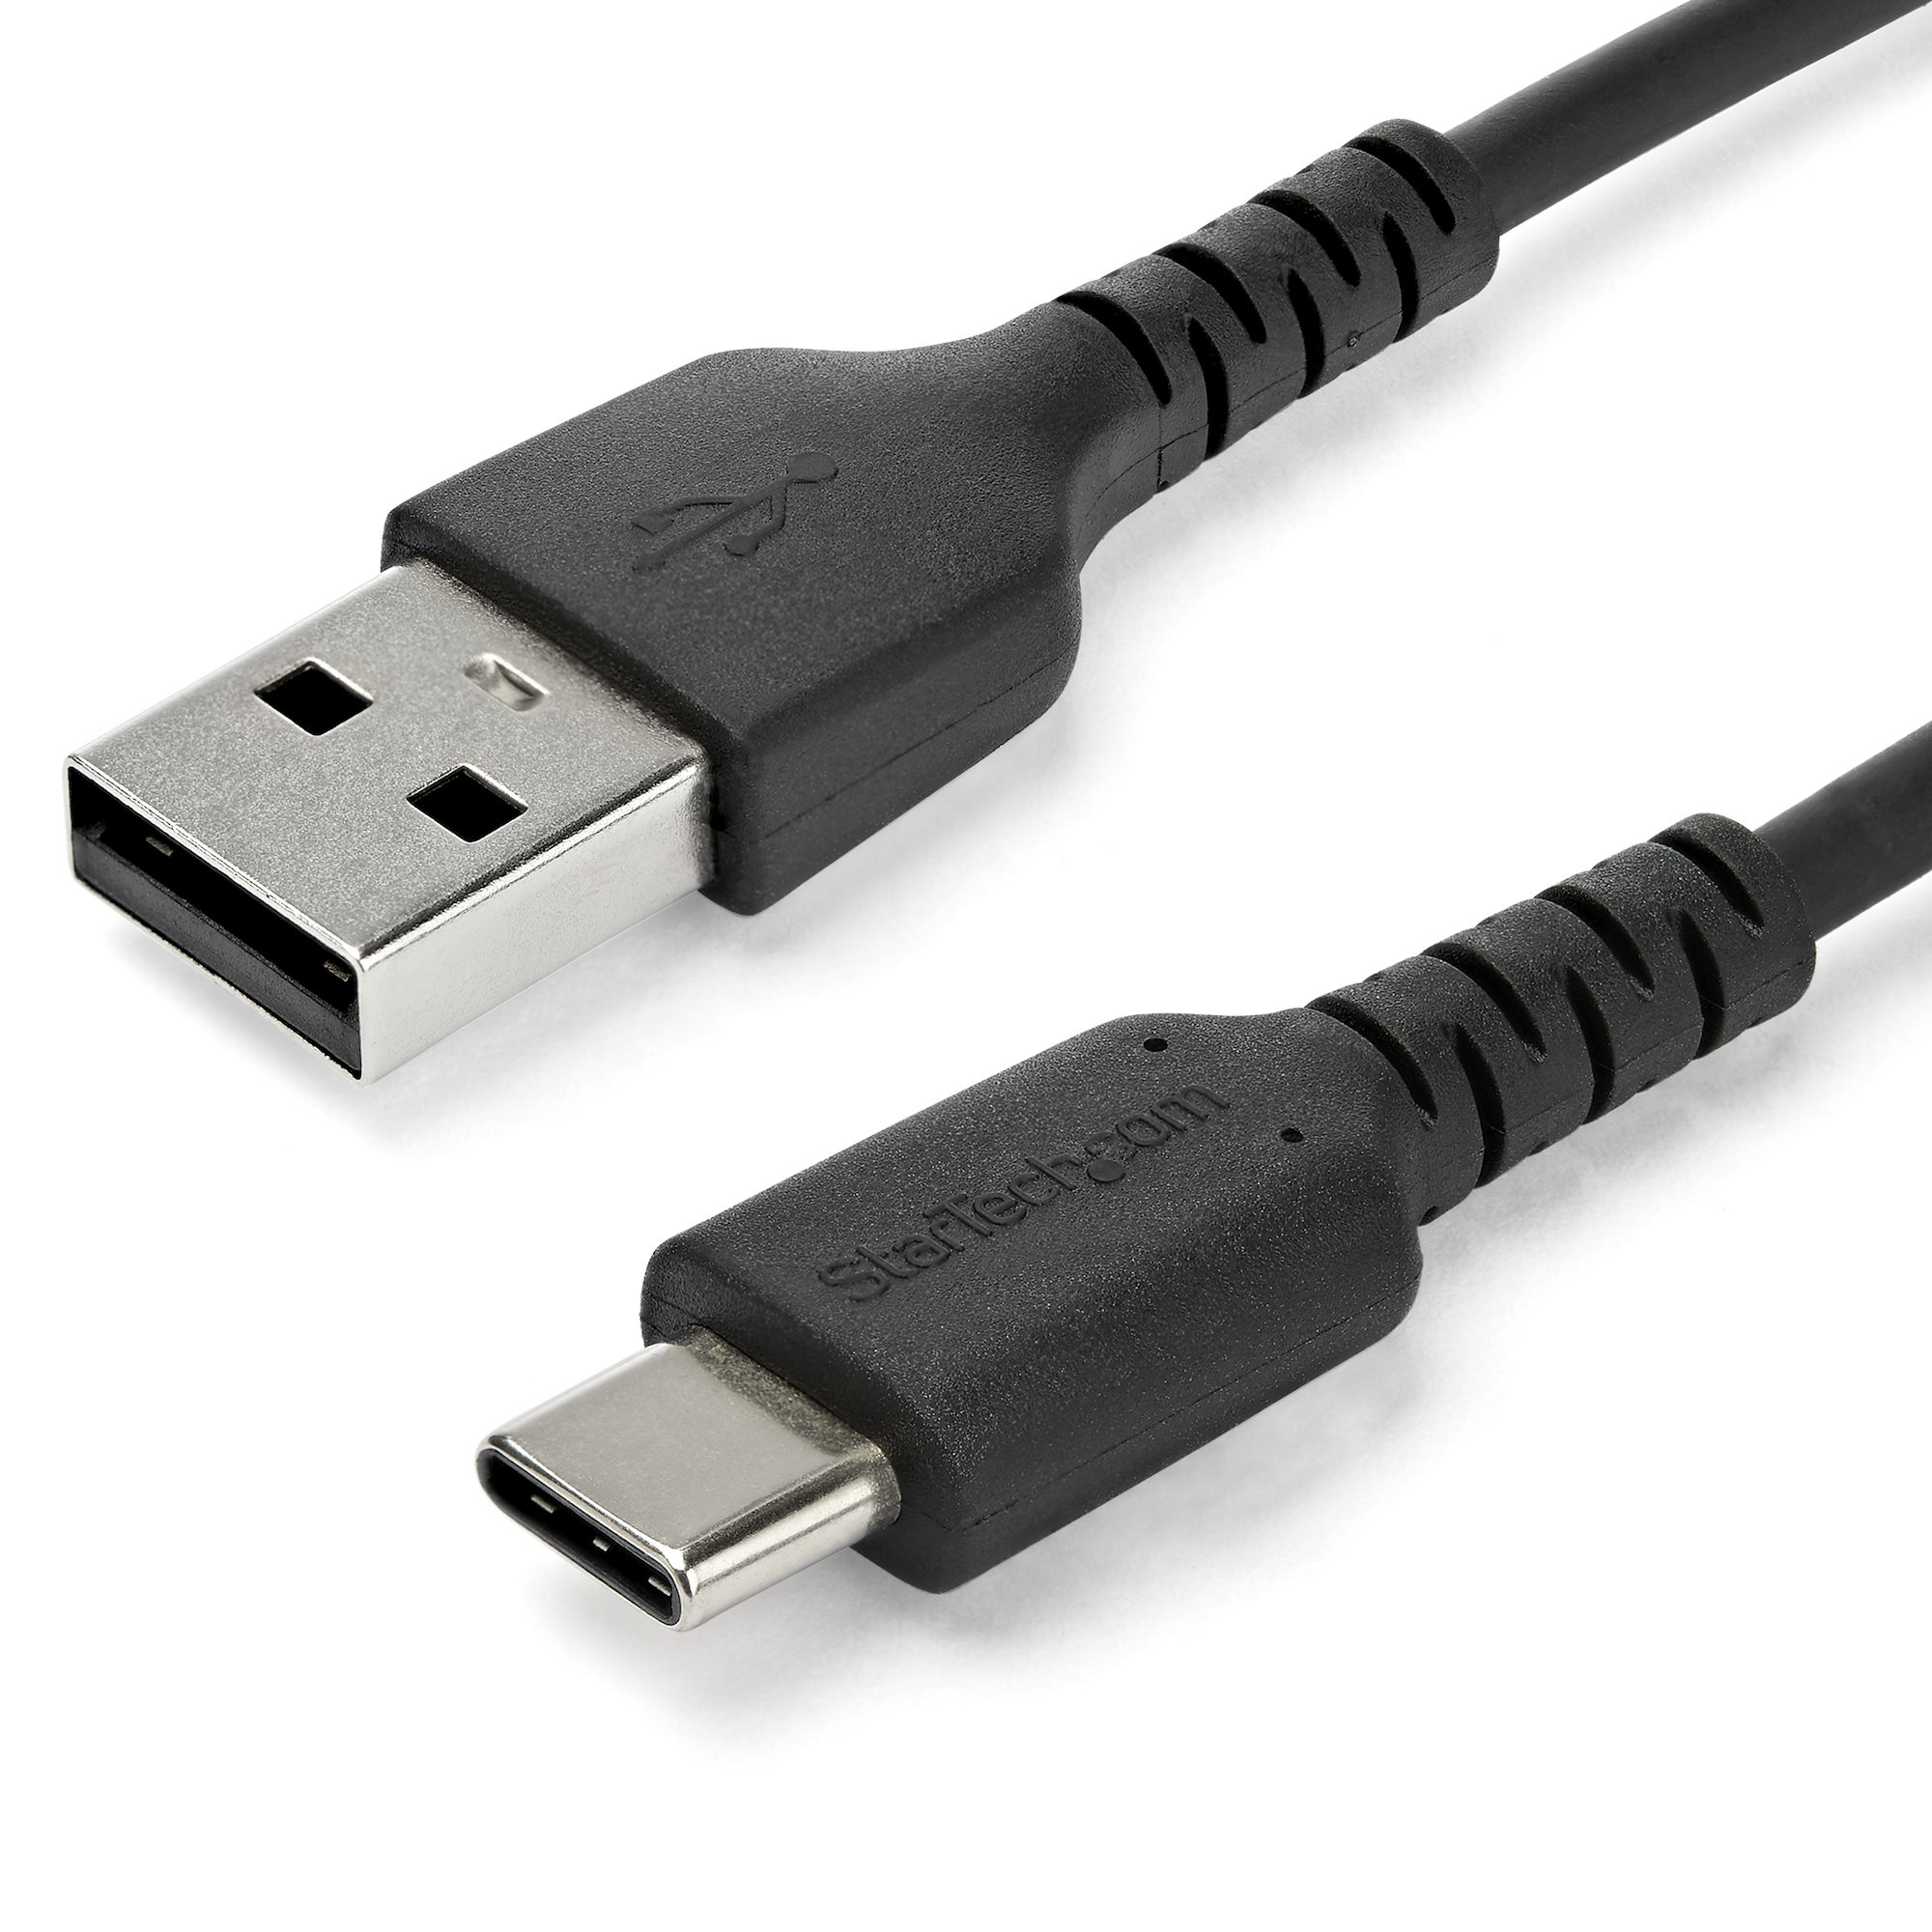 StarTech.com 2m USB A to USB C Charging Cable - Durable Fast Charge & Sync USB 2.0 to USB Type C Data Cord - Rugged TPE Jacket Aramid Fiber M/M 3A Black - Samsung S10, iPad Pro, Pixel